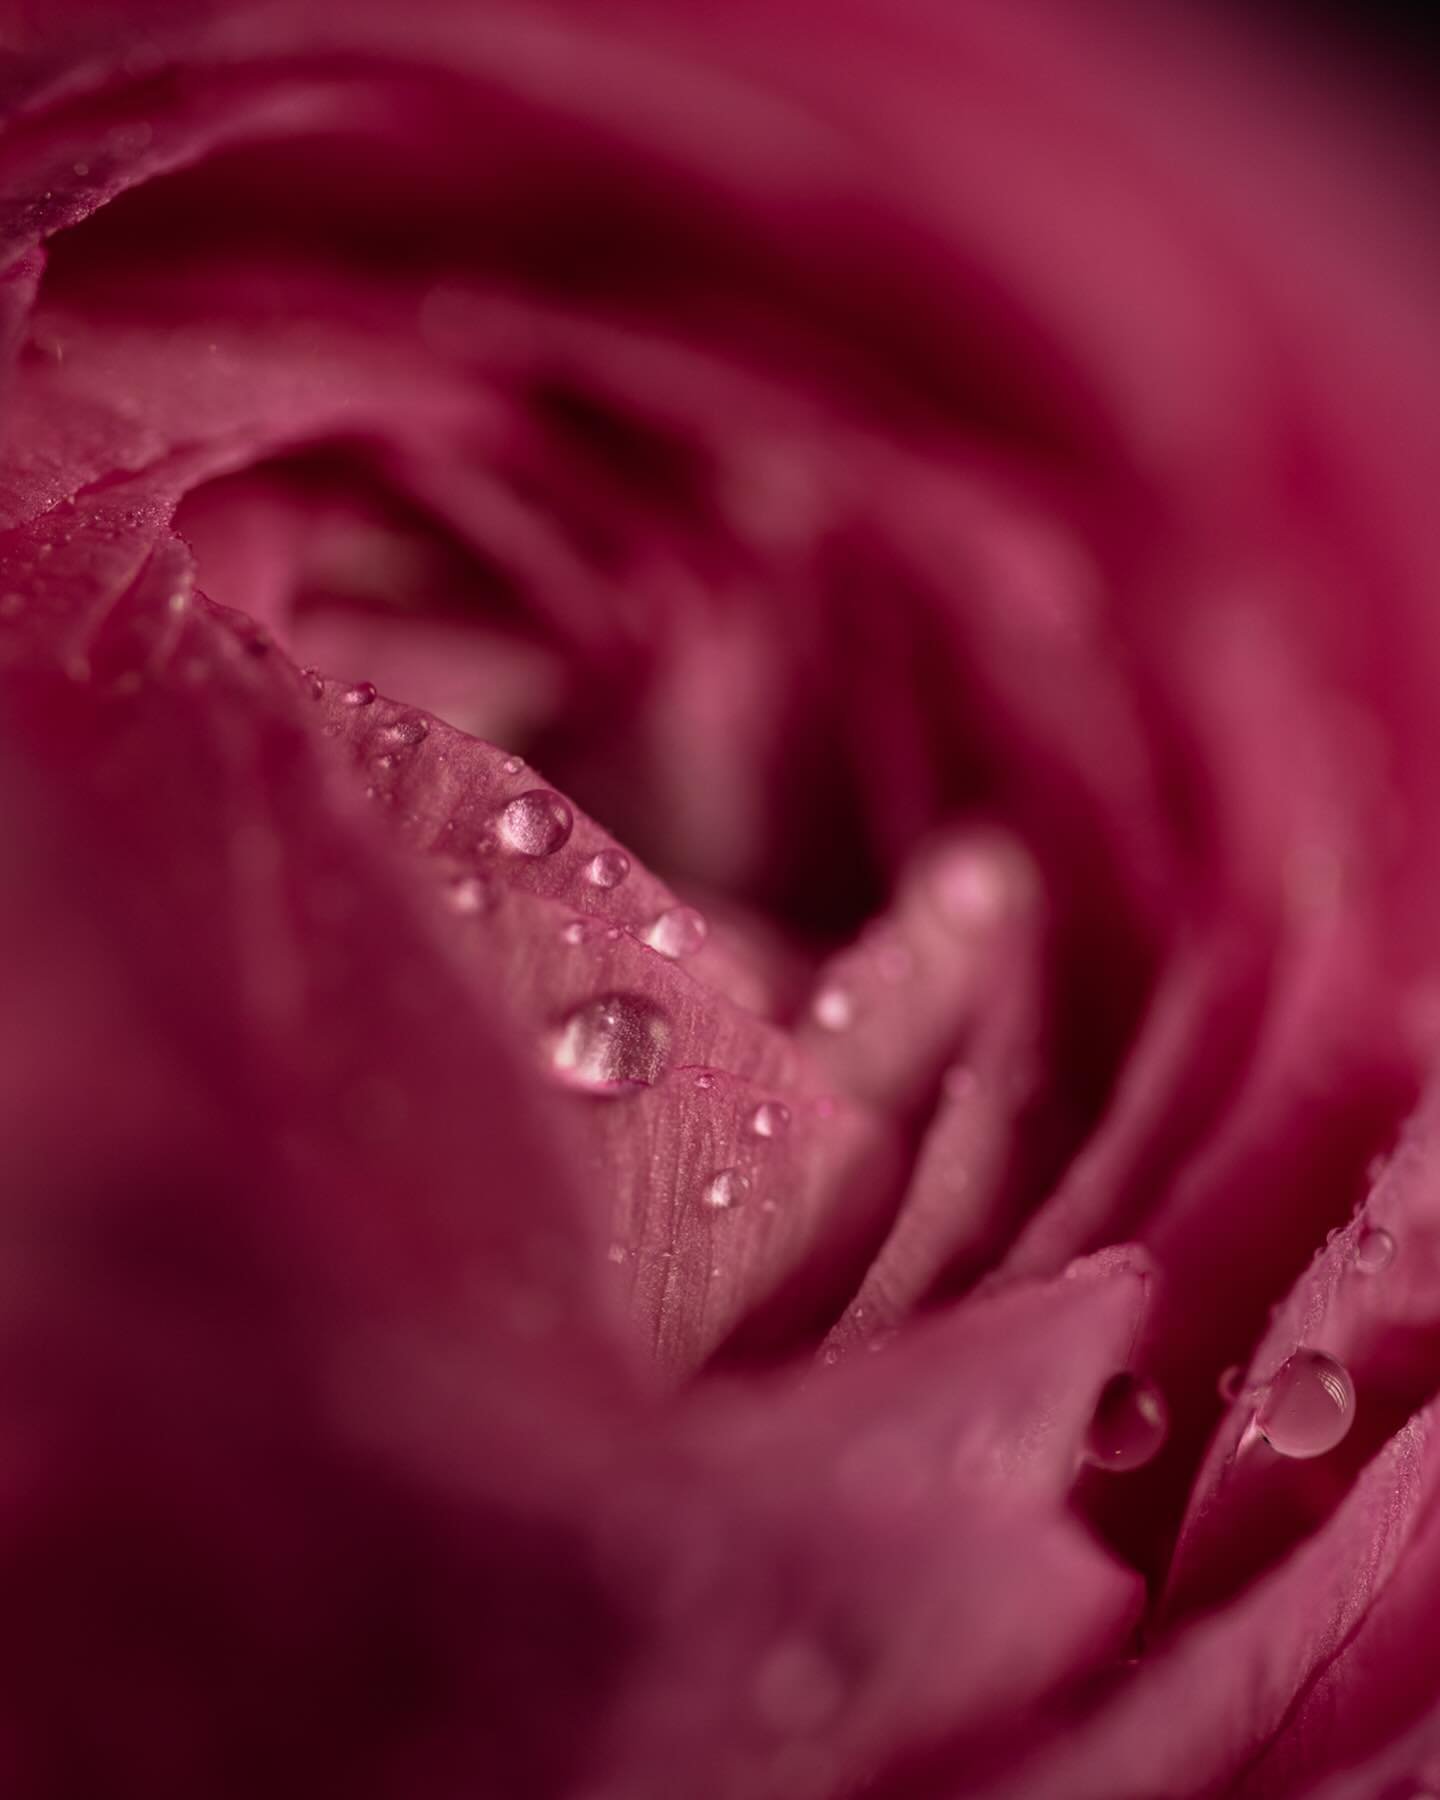 Because it&rsquo;s spring, so I want allllll the flowers. And because ranunculus is finally available, so I&rsquo;m buying it whenever I see it!
*lit with @profoto a2 + Clic Softbox Octa + grid, taken with @nikonusa z7ii and @sigmaphoto 105 mm macro